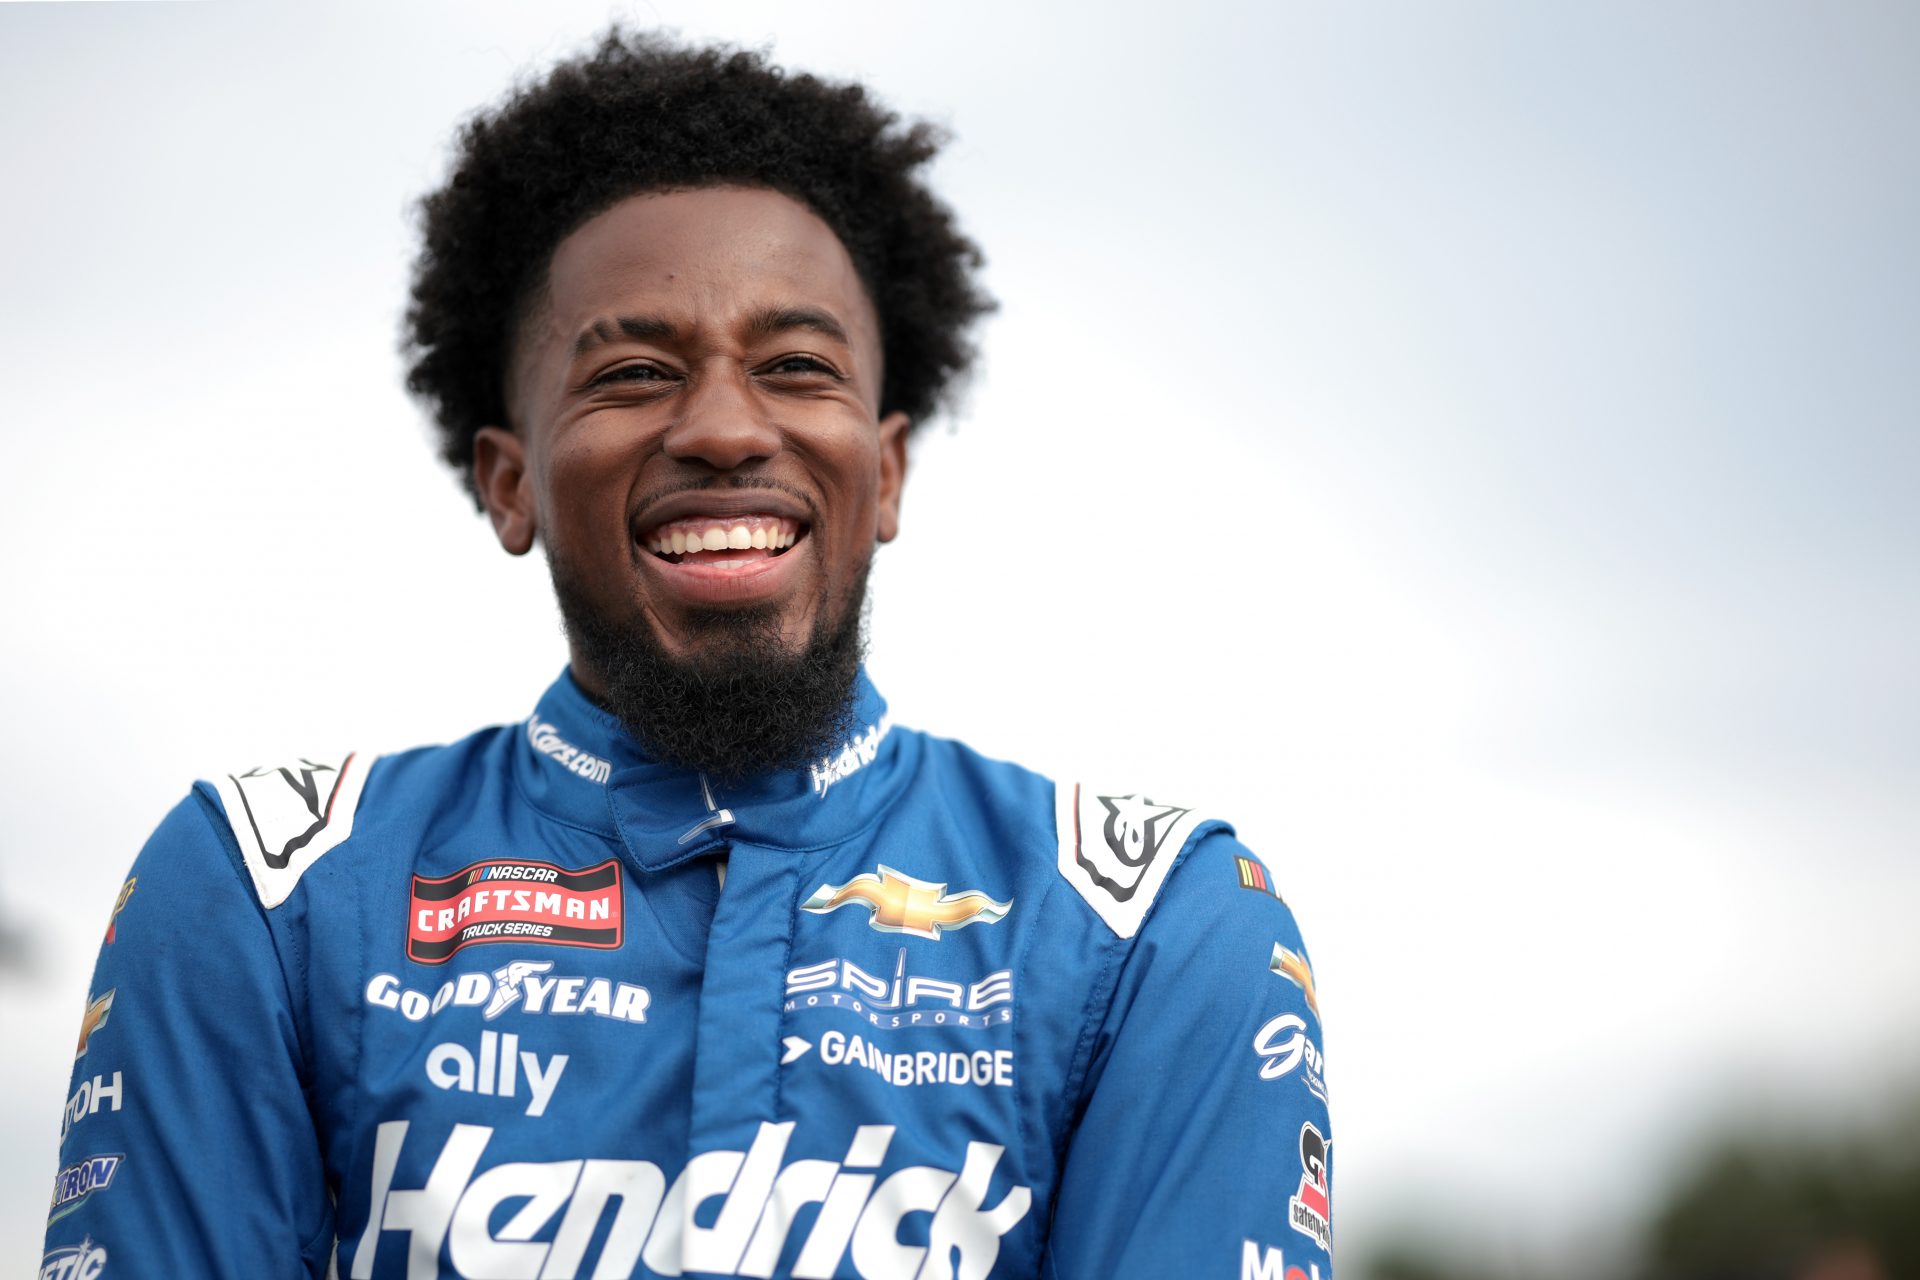 From the gamer’s chair to the driver’s seat: Rajah Caruth’s incredible NASCAR journey